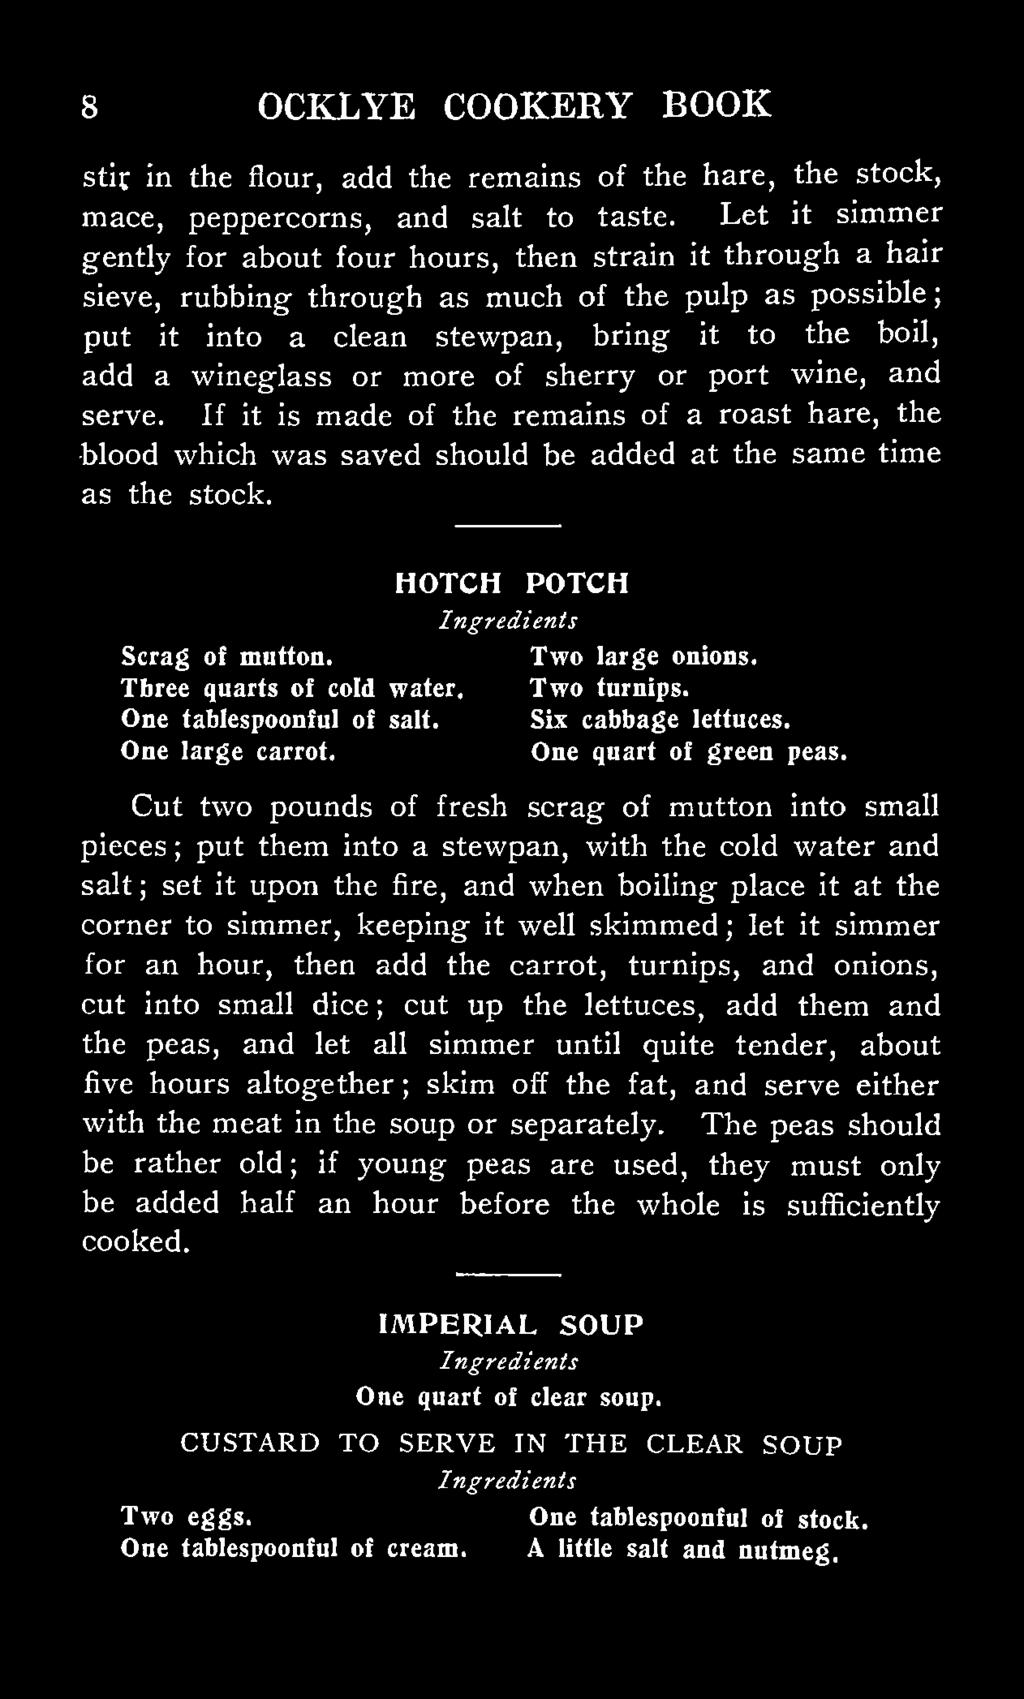 more of sherry or port wine, and serve. If it is made of the remains of a roast hare, the blood which was saved should be added at the same time as the stock. HOTCH POTCH Scrag of mutton.